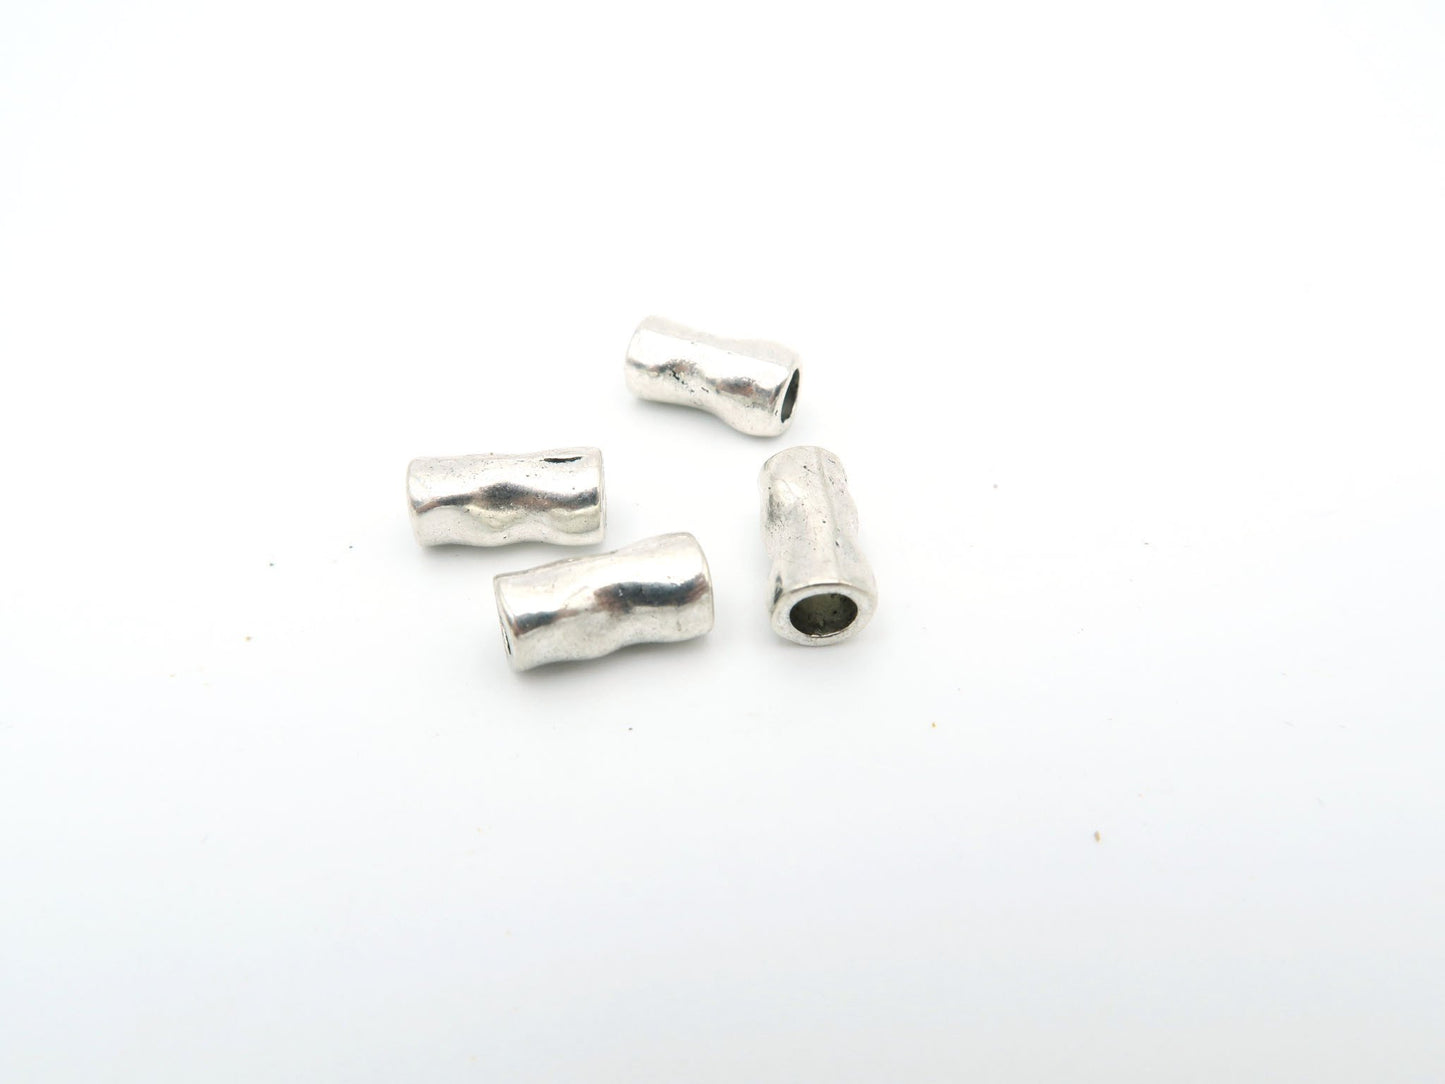 20 Pcs for 3mm round leather Antique Silver small tube jewelry supplies jewelry finding D-5-3-3